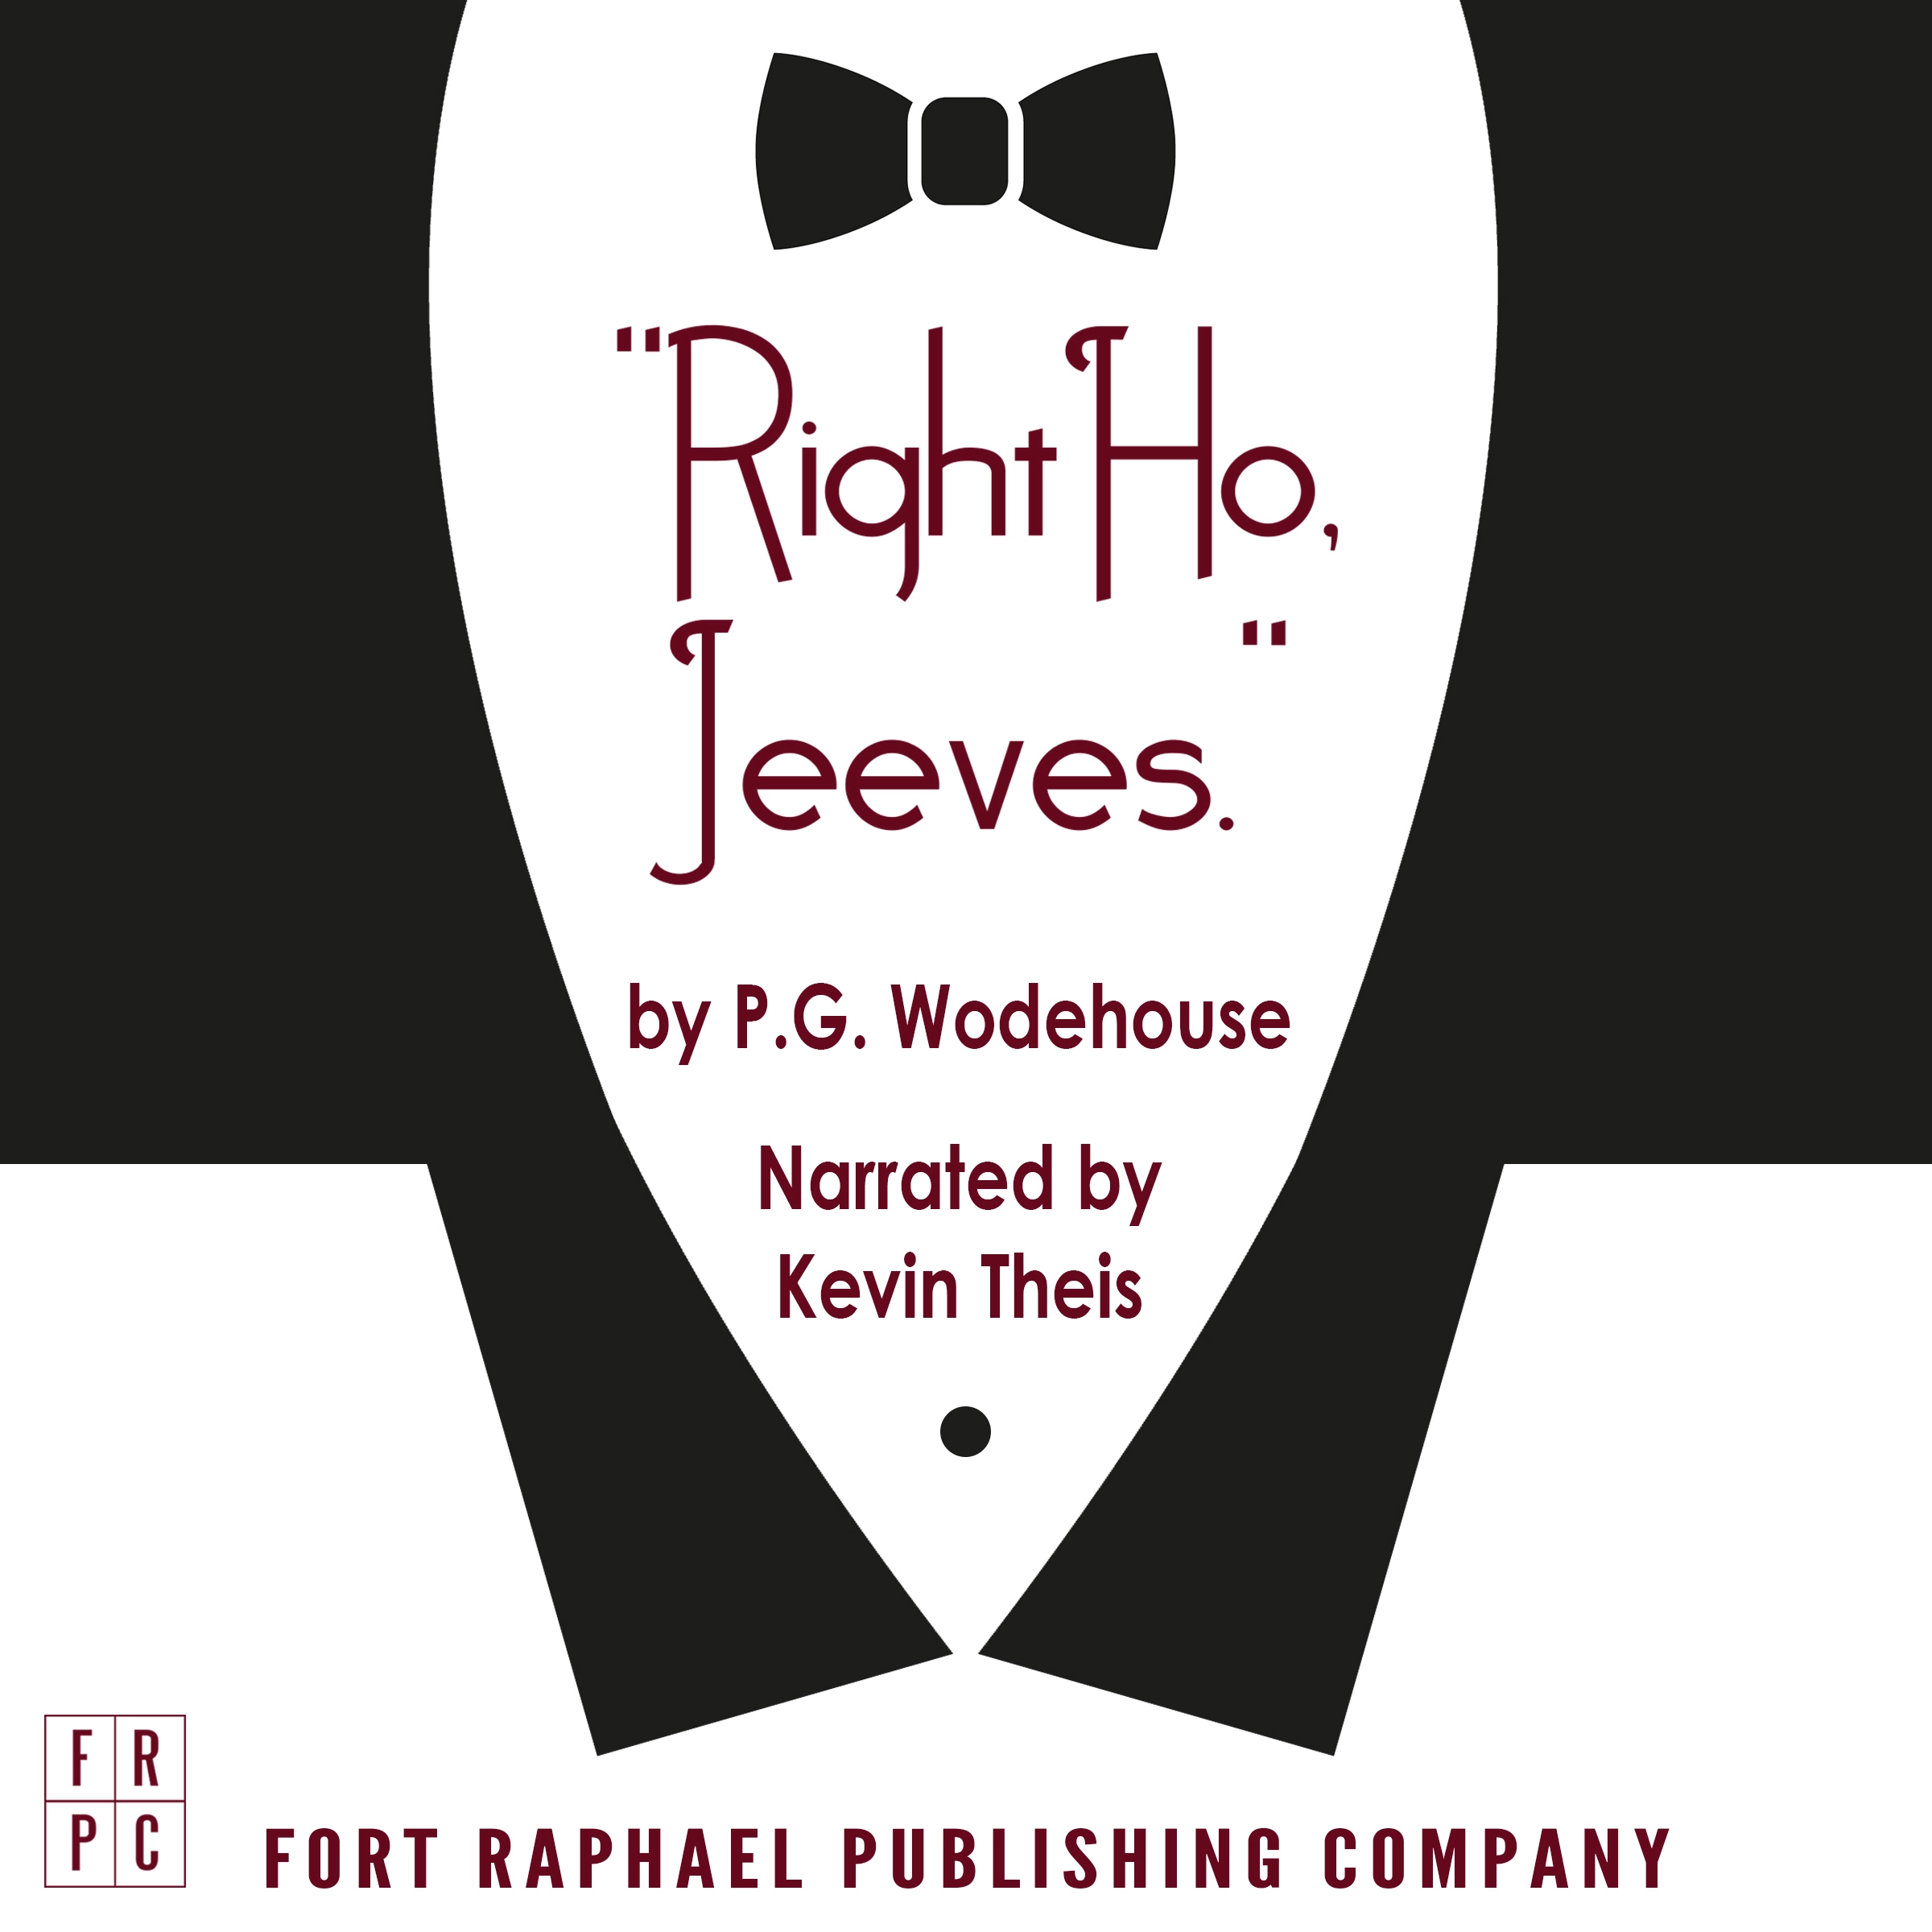 Right Ho, Jeeves - Unabridged Audiobook by P.G. Wodehouse